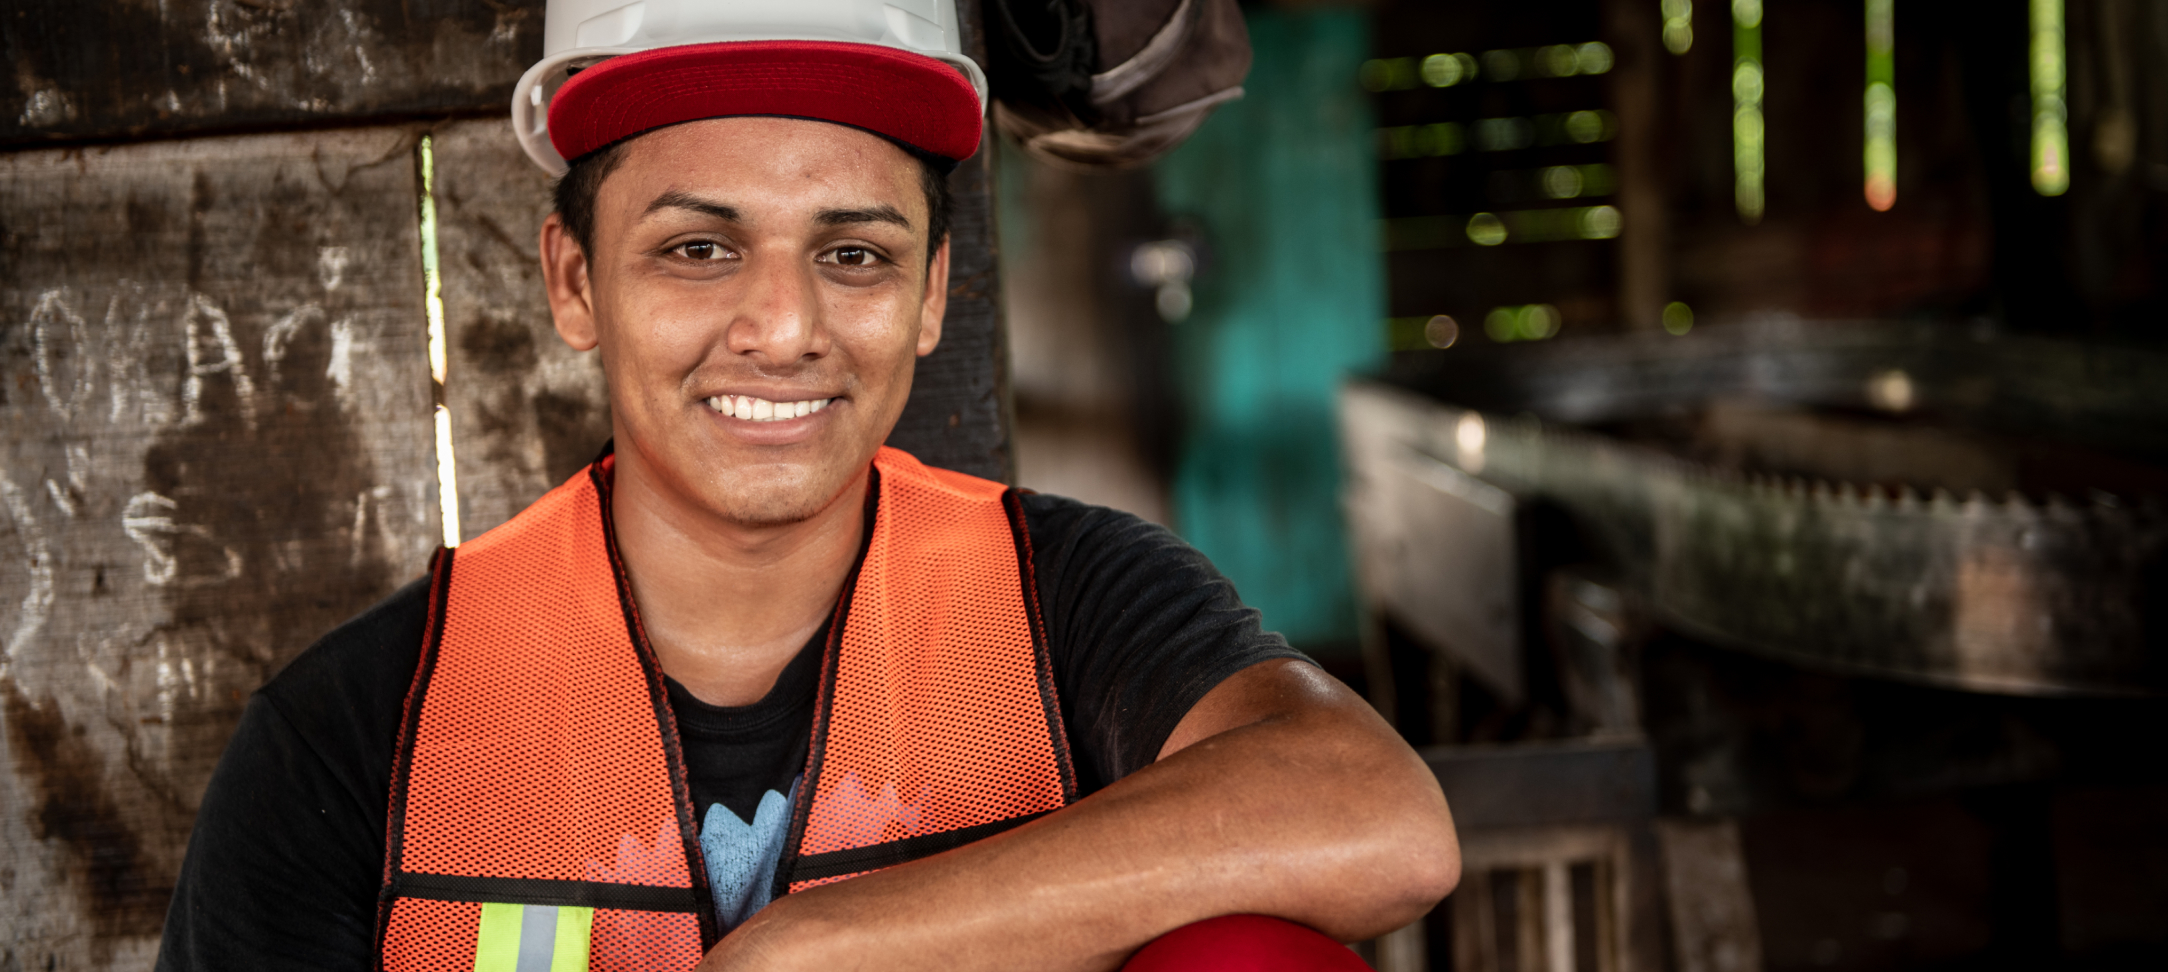 Worker smiling in a hard hat and safety vest